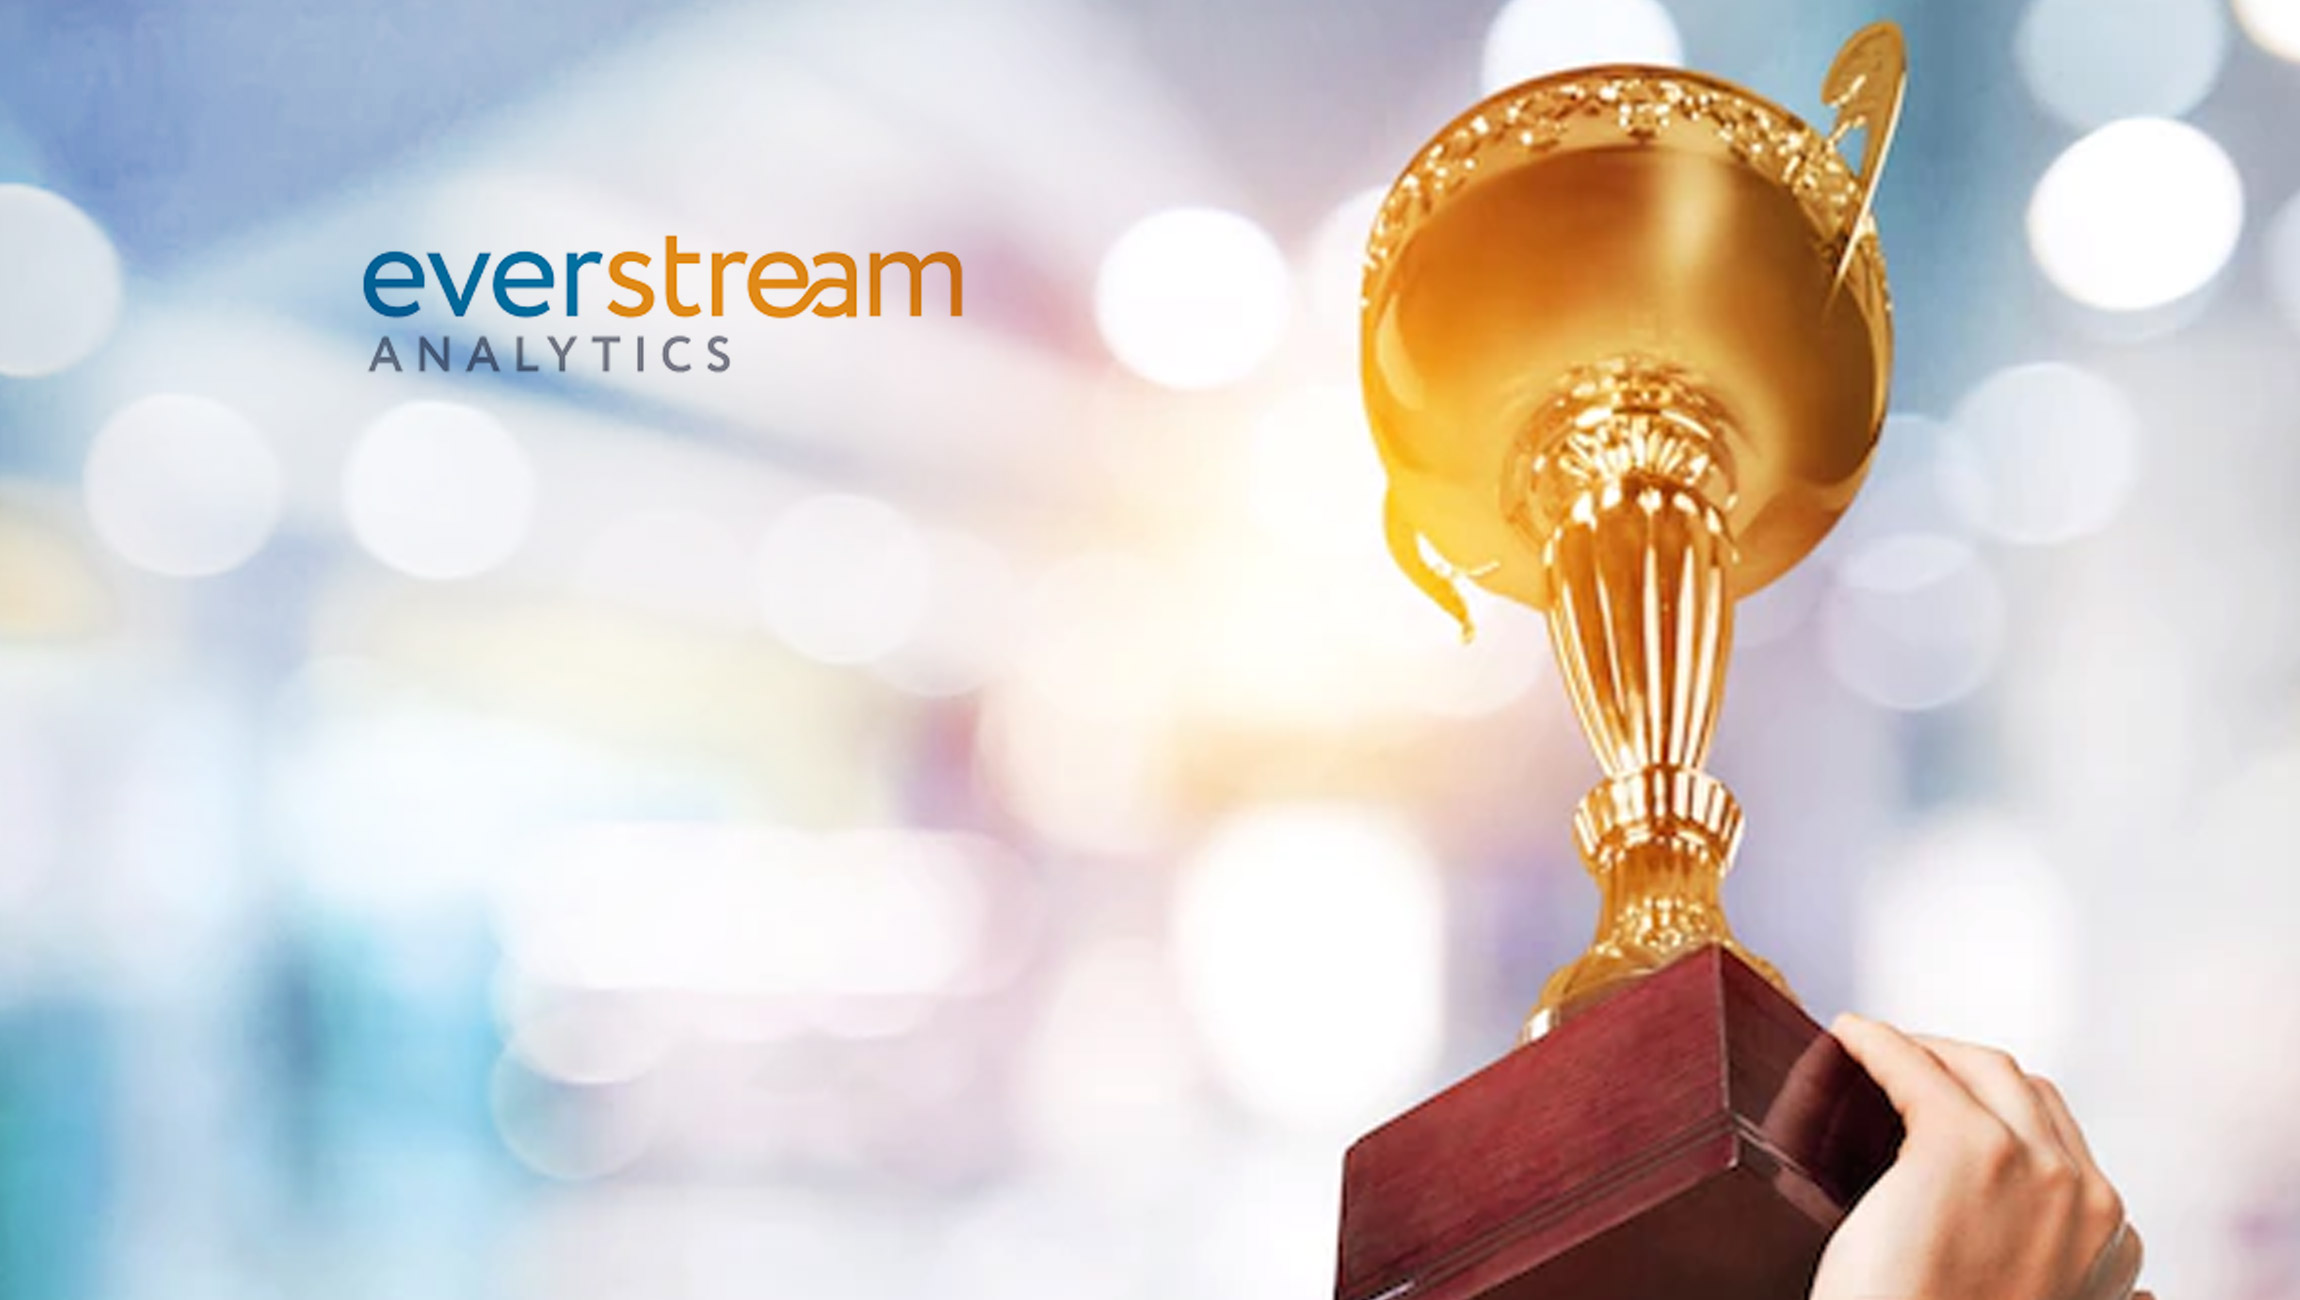 Everstream Analytics Wins 2022 Top Supply Chain Projects Award from Supply & Demand Chain Executive